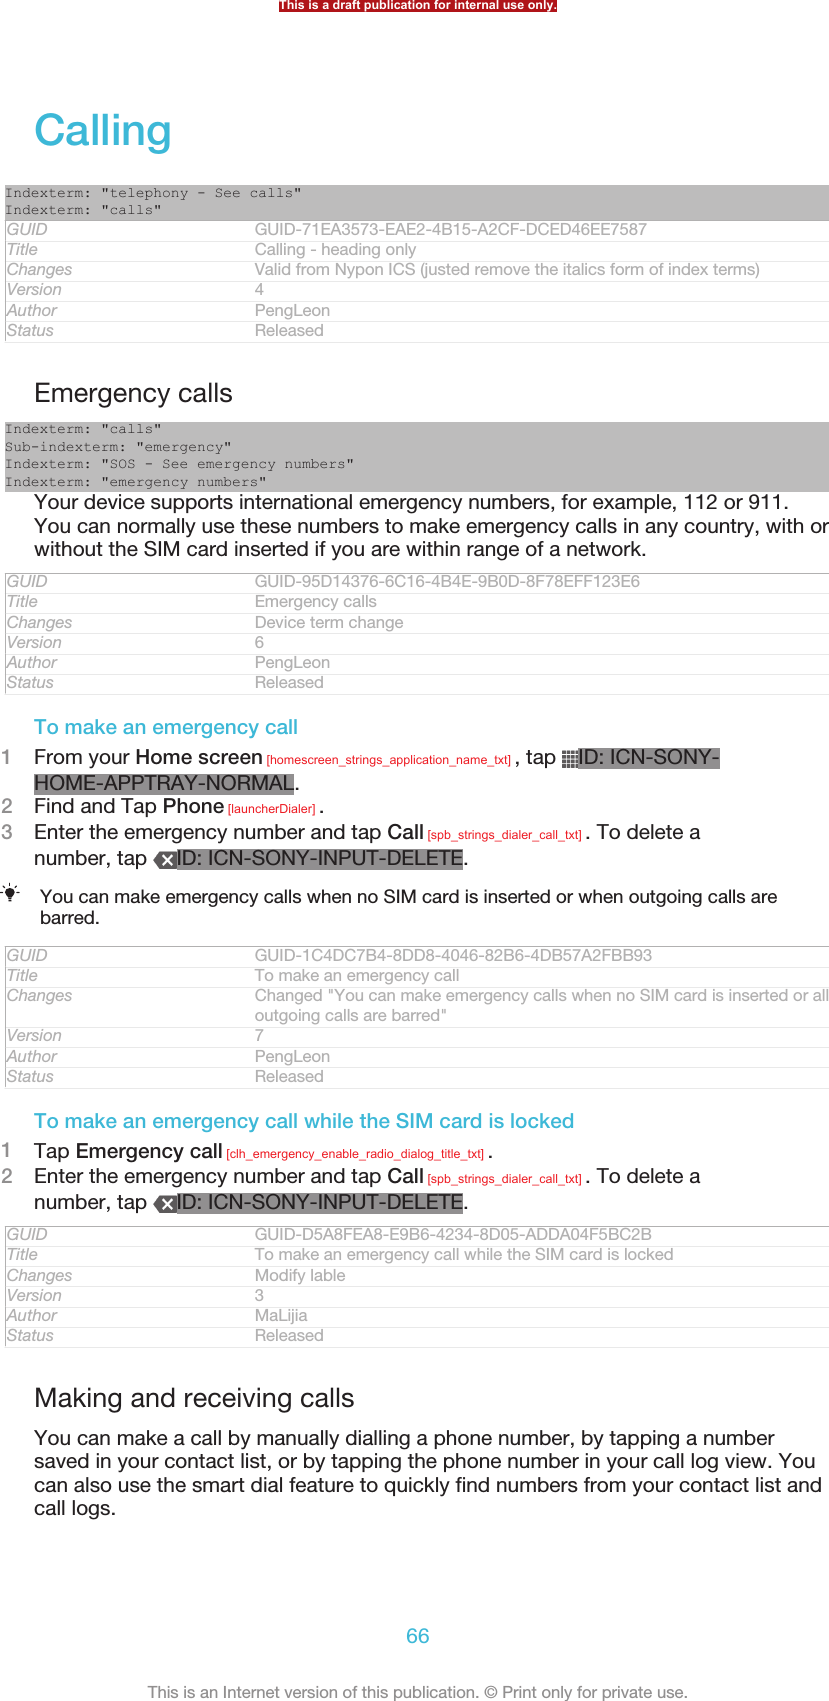 CallingIndexterm: &quot;telephony - See calls&quot;Indexterm: &quot;calls&quot;GUID GUID-71EA3573-EAE2-4B15-A2CF-DCED46EE7587Title Calling - heading onlyChanges Valid from Nypon ICS (justed remove the italics form of index terms)Version 4Author PengLeonStatus ReleasedEmergency callsIndexterm: &quot;calls&quot;Sub-indexterm: &quot;emergency&quot;Indexterm: &quot;SOS - See emergency numbers&quot;Indexterm: &quot;emergency numbers&quot;Your device supports international emergency numbers, for example, 112 or 911.You can normally use these numbers to make emergency calls in any country, with orwithout the SIM card inserted if you are within range of a network.GUID GUID-95D14376-6C16-4B4E-9B0D-8F78EFF123E6Title Emergency callsChanges Device term changeVersion 6Author PengLeonStatus ReleasedTo make an emergency call1From your Home screen [homescreen_strings_application_name_txt] , tap  ID: ICN-SONY-HOME-APPTRAY-NORMAL.2Find and Tap Phone [launcherDialer] .3Enter the emergency number and tap Call [spb_strings_dialer_call_txt] . To delete anumber, tap  ID: ICN-SONY-INPUT-DELETE.You can make emergency calls when no SIM card is inserted or when outgoing calls arebarred.GUID GUID-1C4DC7B4-8DD8-4046-82B6-4DB57A2FBB93Title To make an emergency callChanges Changed &quot;You can make emergency calls when no SIM card is inserted or alloutgoing calls are barred&quot;Version 7Author PengLeonStatus ReleasedTo make an emergency call while the SIM card is locked1Tap Emergency call [clh_emergency_enable_radio_dialog_title_txt] .2Enter the emergency number and tap Call [spb_strings_dialer_call_txt] . To delete anumber, tap  ID: ICN-SONY-INPUT-DELETE.GUID GUID-D5A8FEA8-E9B6-4234-8D05-ADDA04F5BC2BTitle To make an emergency call while the SIM card is lockedChanges Modify lableVersion 3Author MaLijiaStatus ReleasedMaking and receiving callsYou can make a call by manually dialling a phone number, by tapping a numbersaved in your contact list, or by tapping the phone number in your call log view. Youcan also use the smart dial feature to quickly find numbers from your contact list andcall logs.This is a draft publication for internal use only.66This is an Internet version of this publication. © Print only for private use.